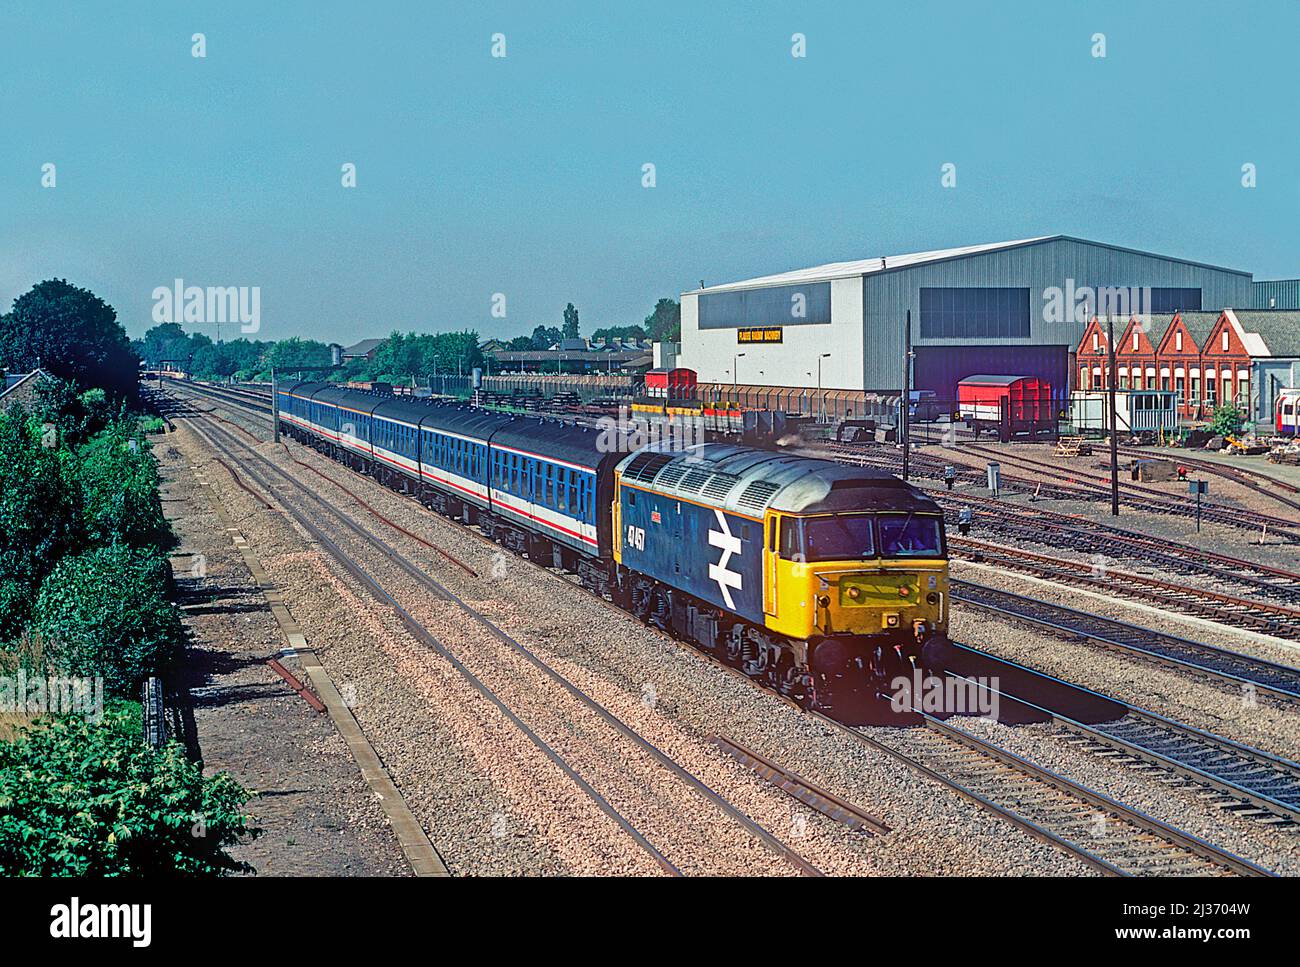 A Class 47 diesel locomotive number 47457 in large logo livery working a “Network Express” Network SouthEast service at West Ealing. 7th September 1991. Stock Photo